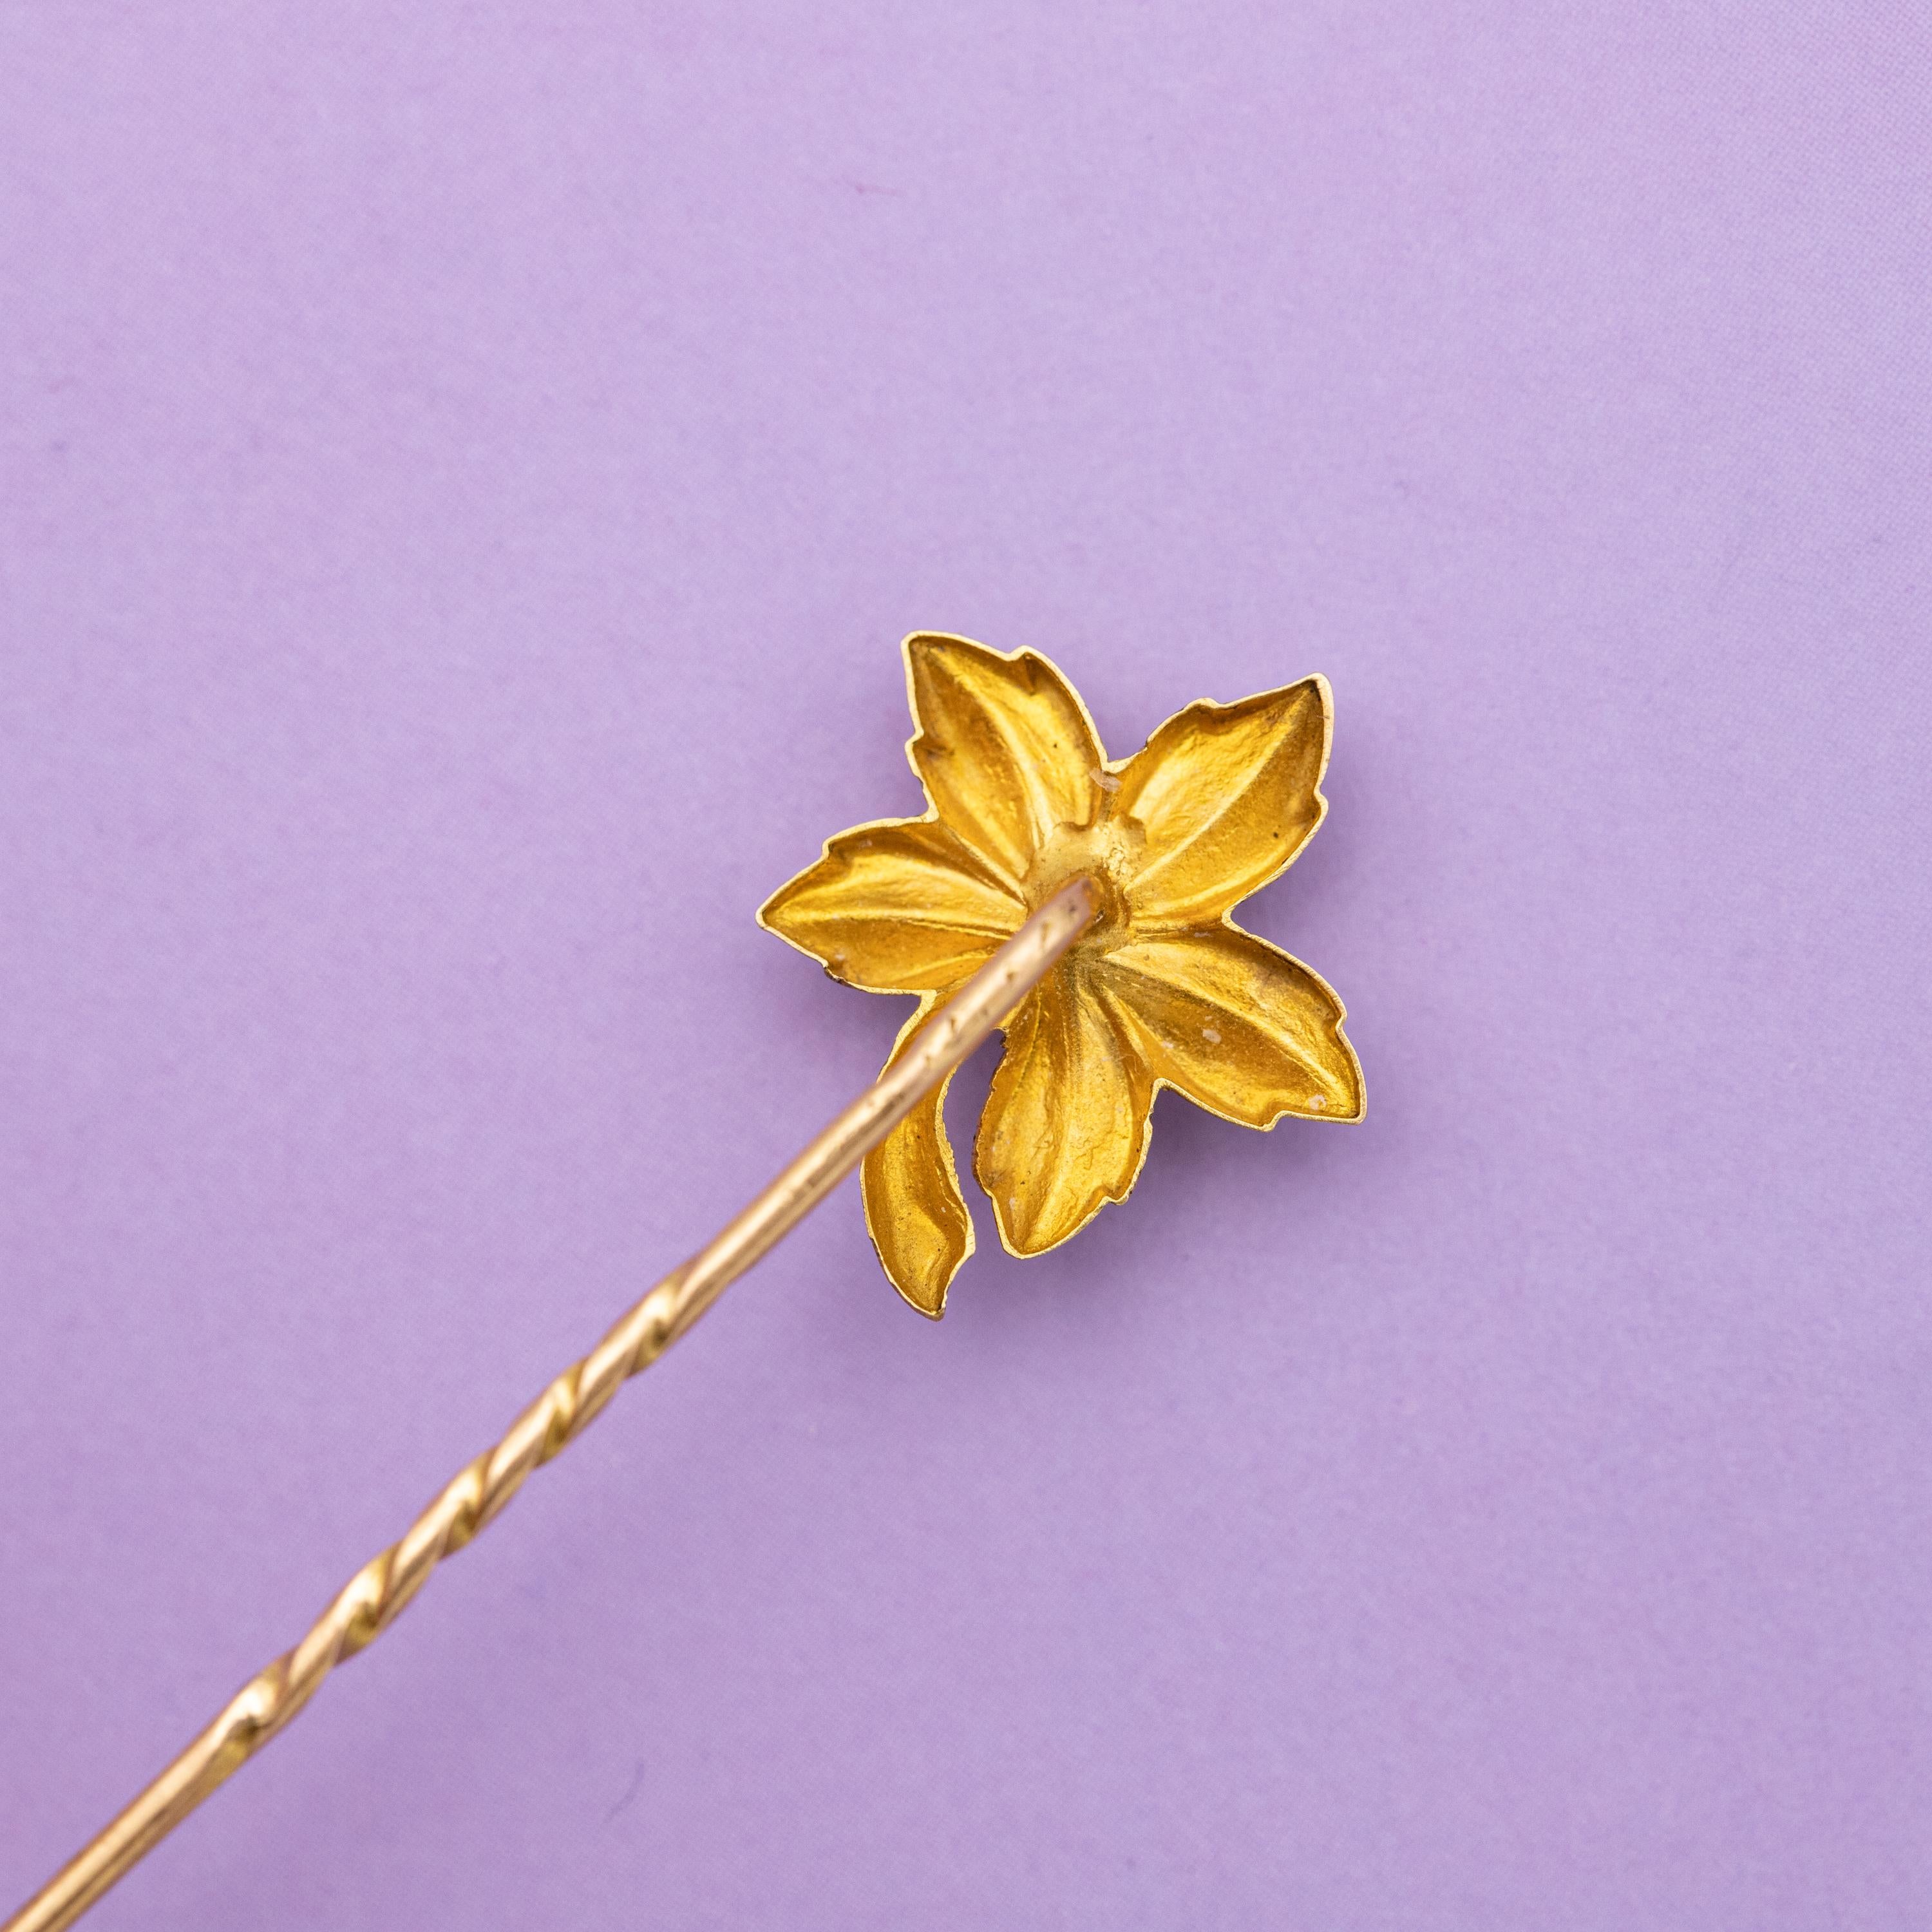 18k Yellow gold stick pin - Family brooch - detailed Ivy cravat pin For Sale 3